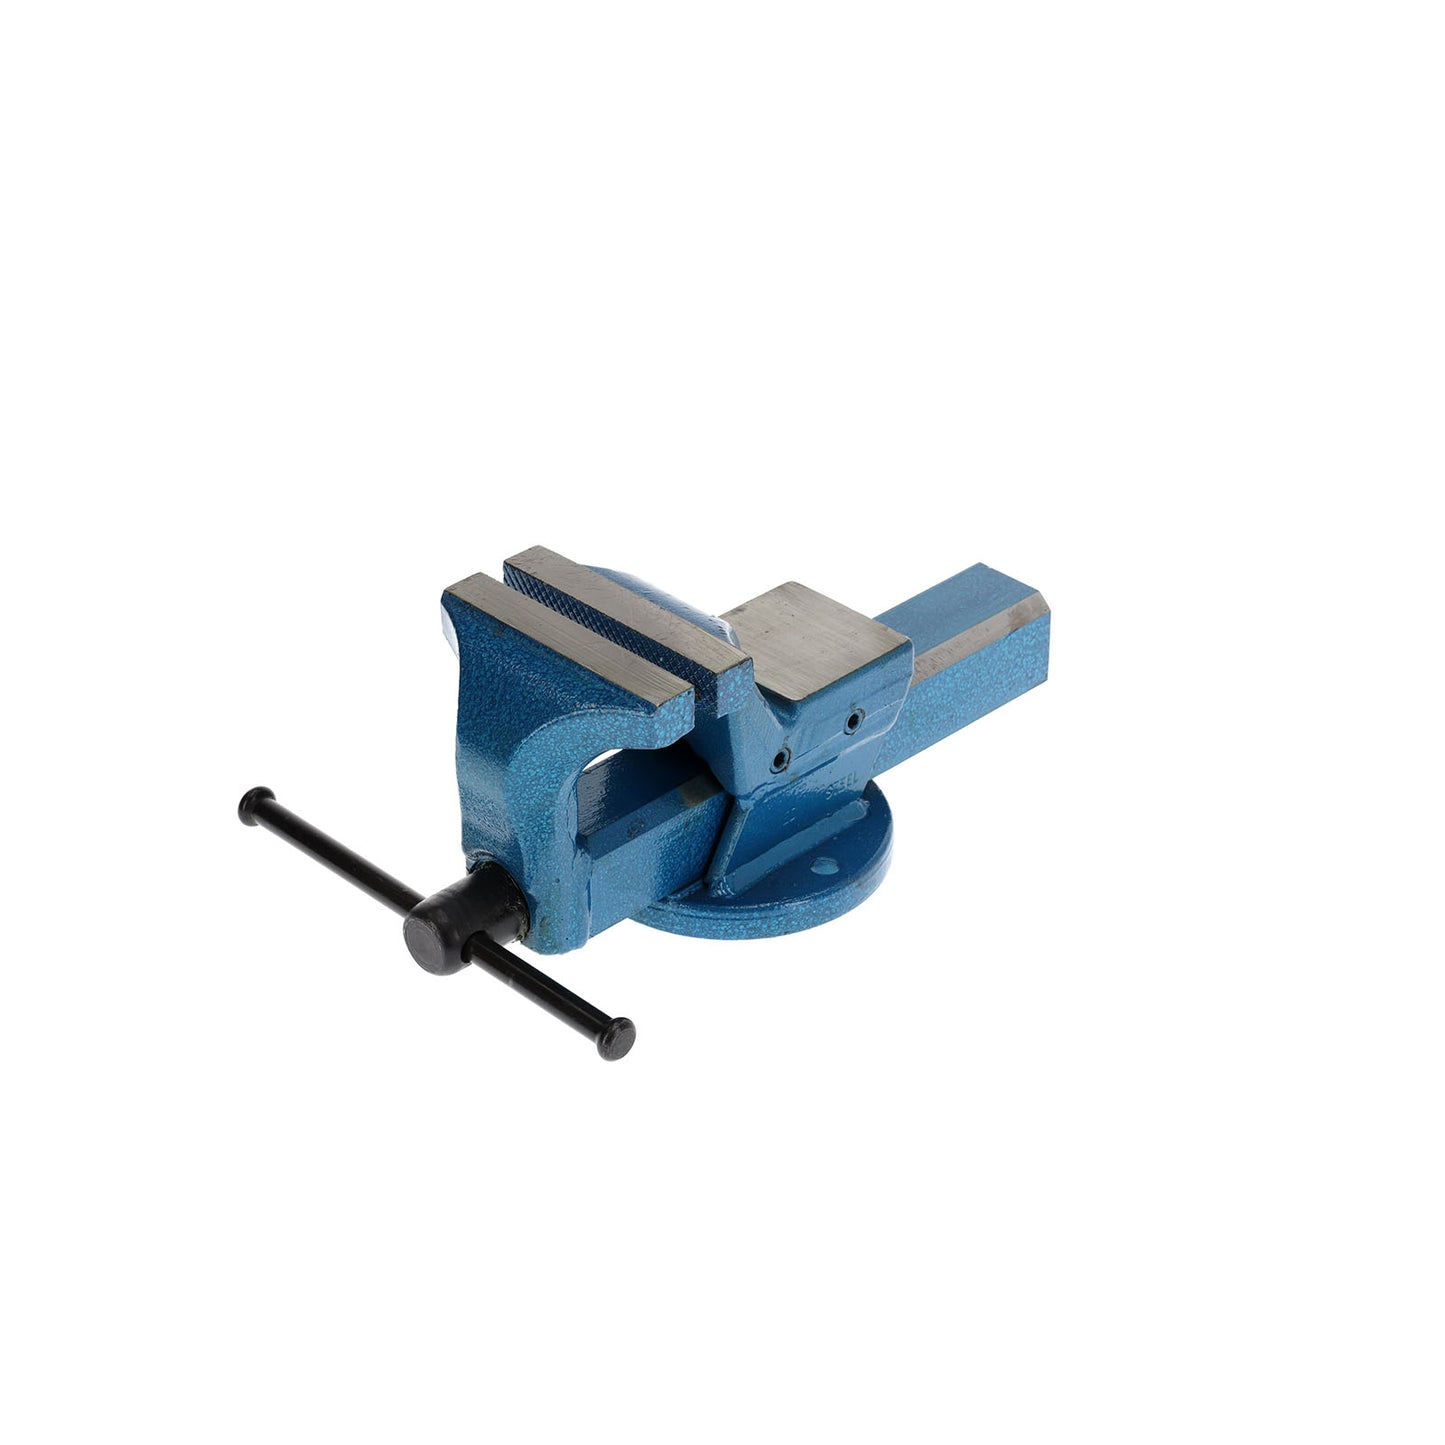 GEDORE 411-125 - Bench Vise (6501100)